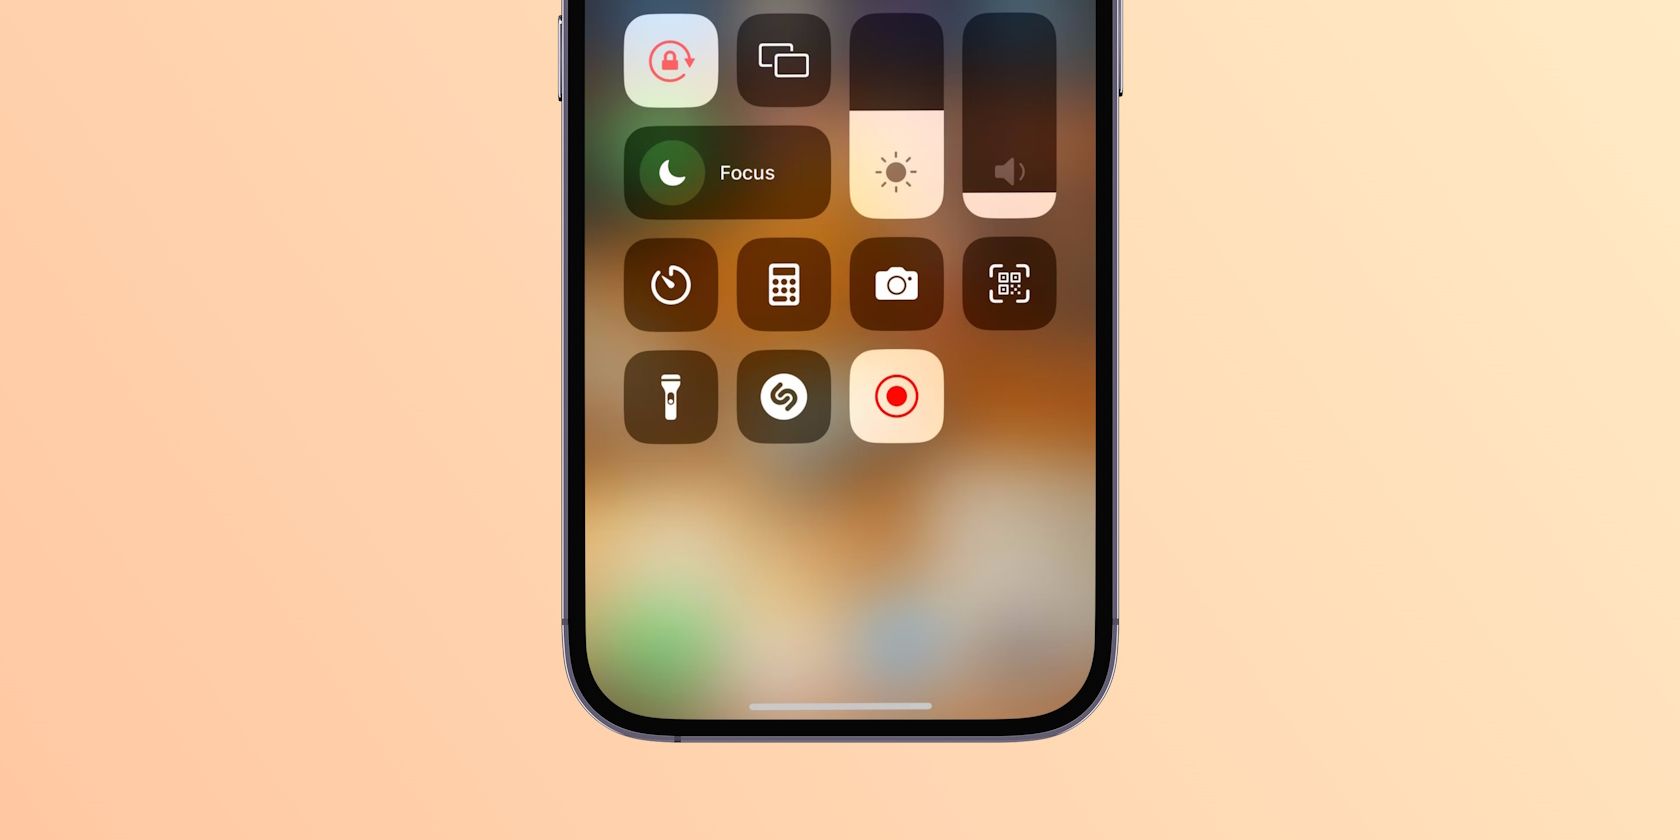 The built-in screen recording tool appearing in the Control Center on an iPhone